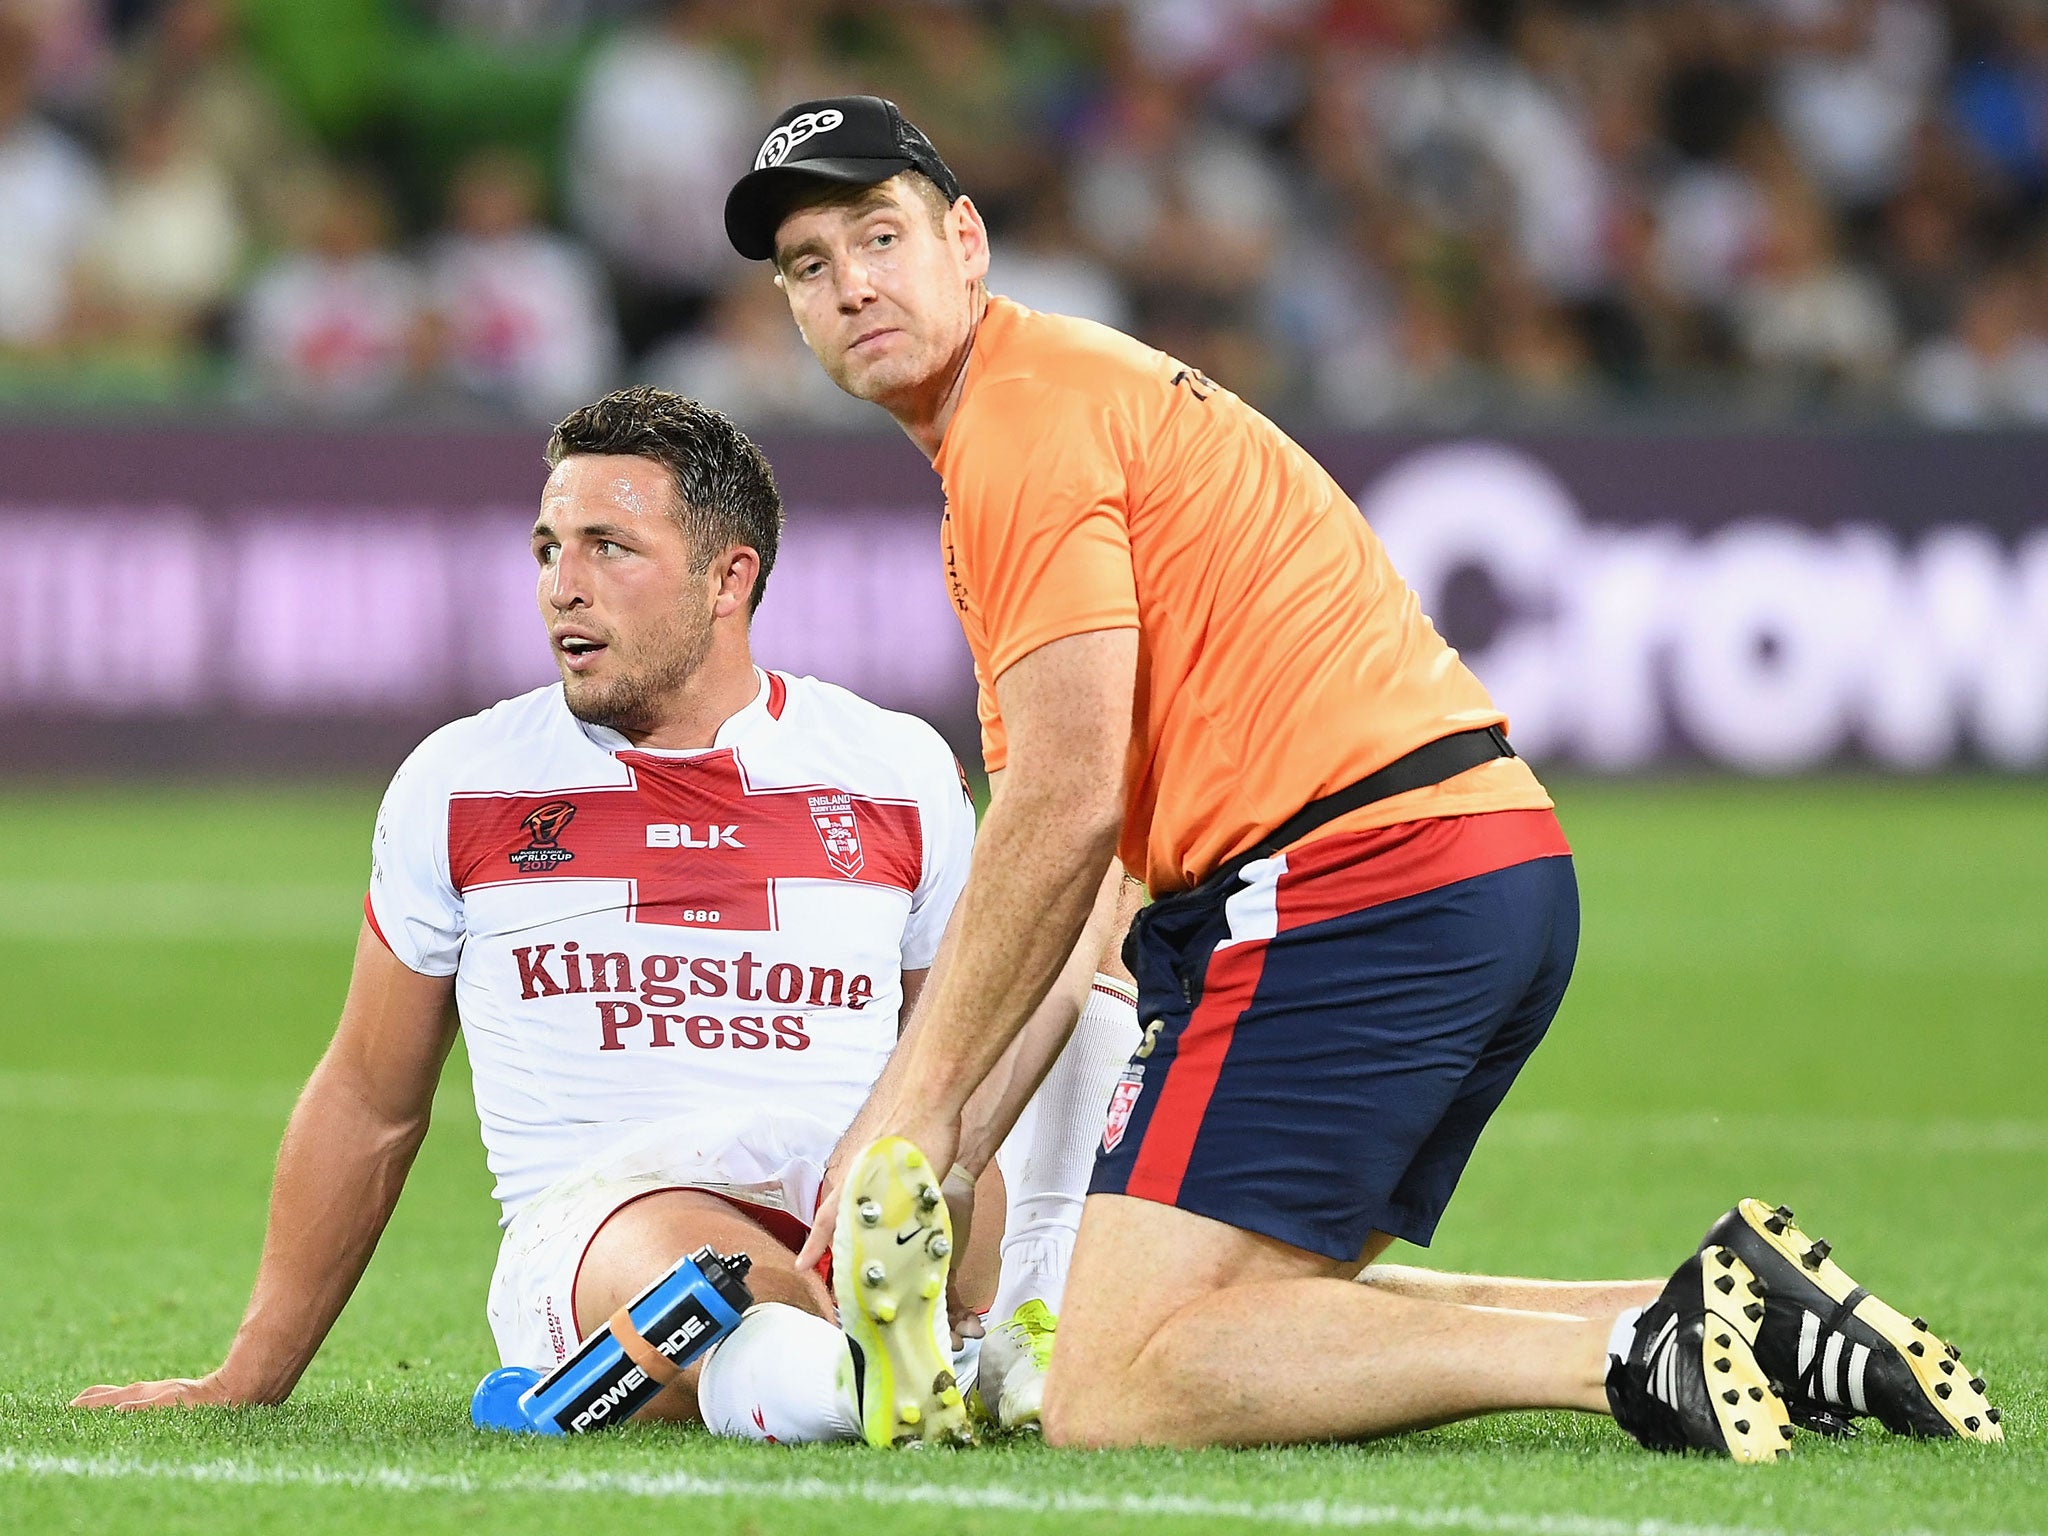 Sam Burgess is set to return to the side for England's quarter-final on Sunday